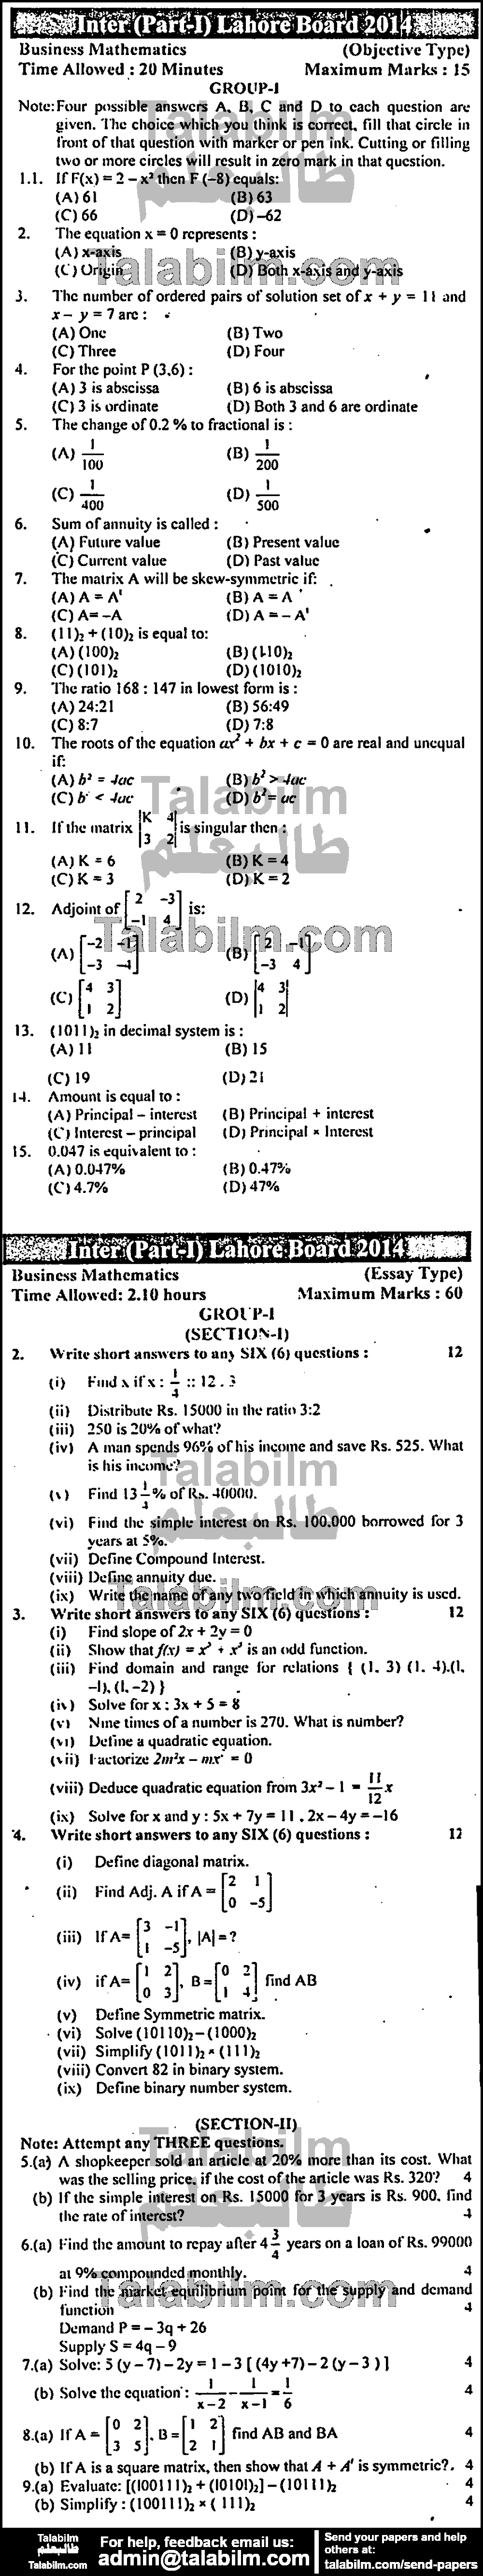 Business Mathematics 0 past paper for Group-I 2014